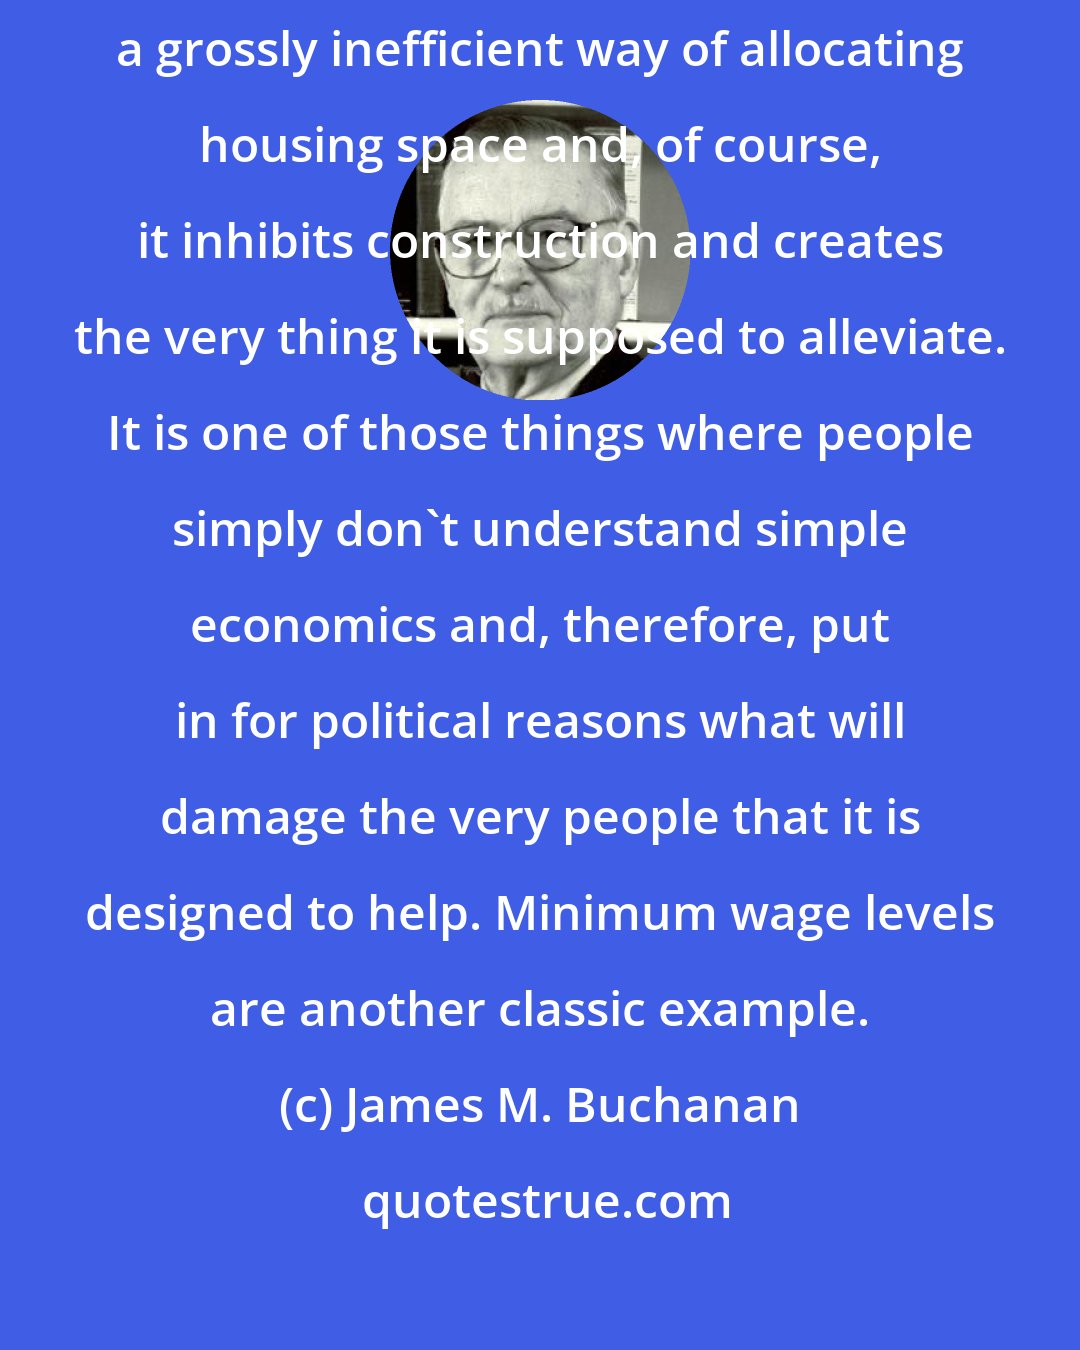 James M. Buchanan: Rent control is one policy that economists universally would oppose. It is a grossly inefficient way of allocating housing space and, of course, it inhibits construction and creates the very thing it is supposed to alleviate. It is one of those things where people simply don't understand simple economics and, therefore, put in for political reasons what will damage the very people that it is designed to help. Minimum wage levels are another classic example.